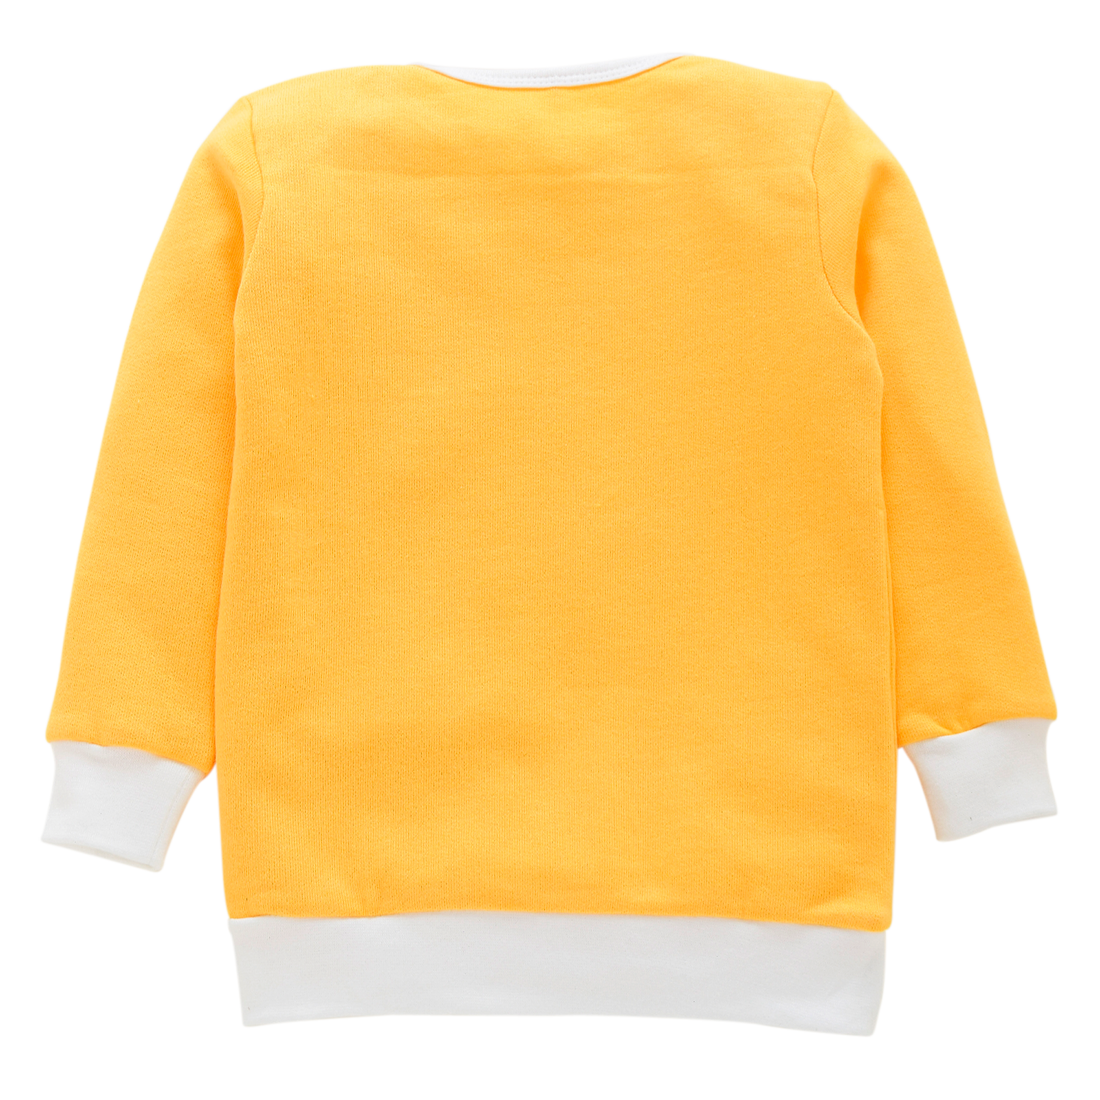 Sweatshirts for little ones (0-5 Yrs)